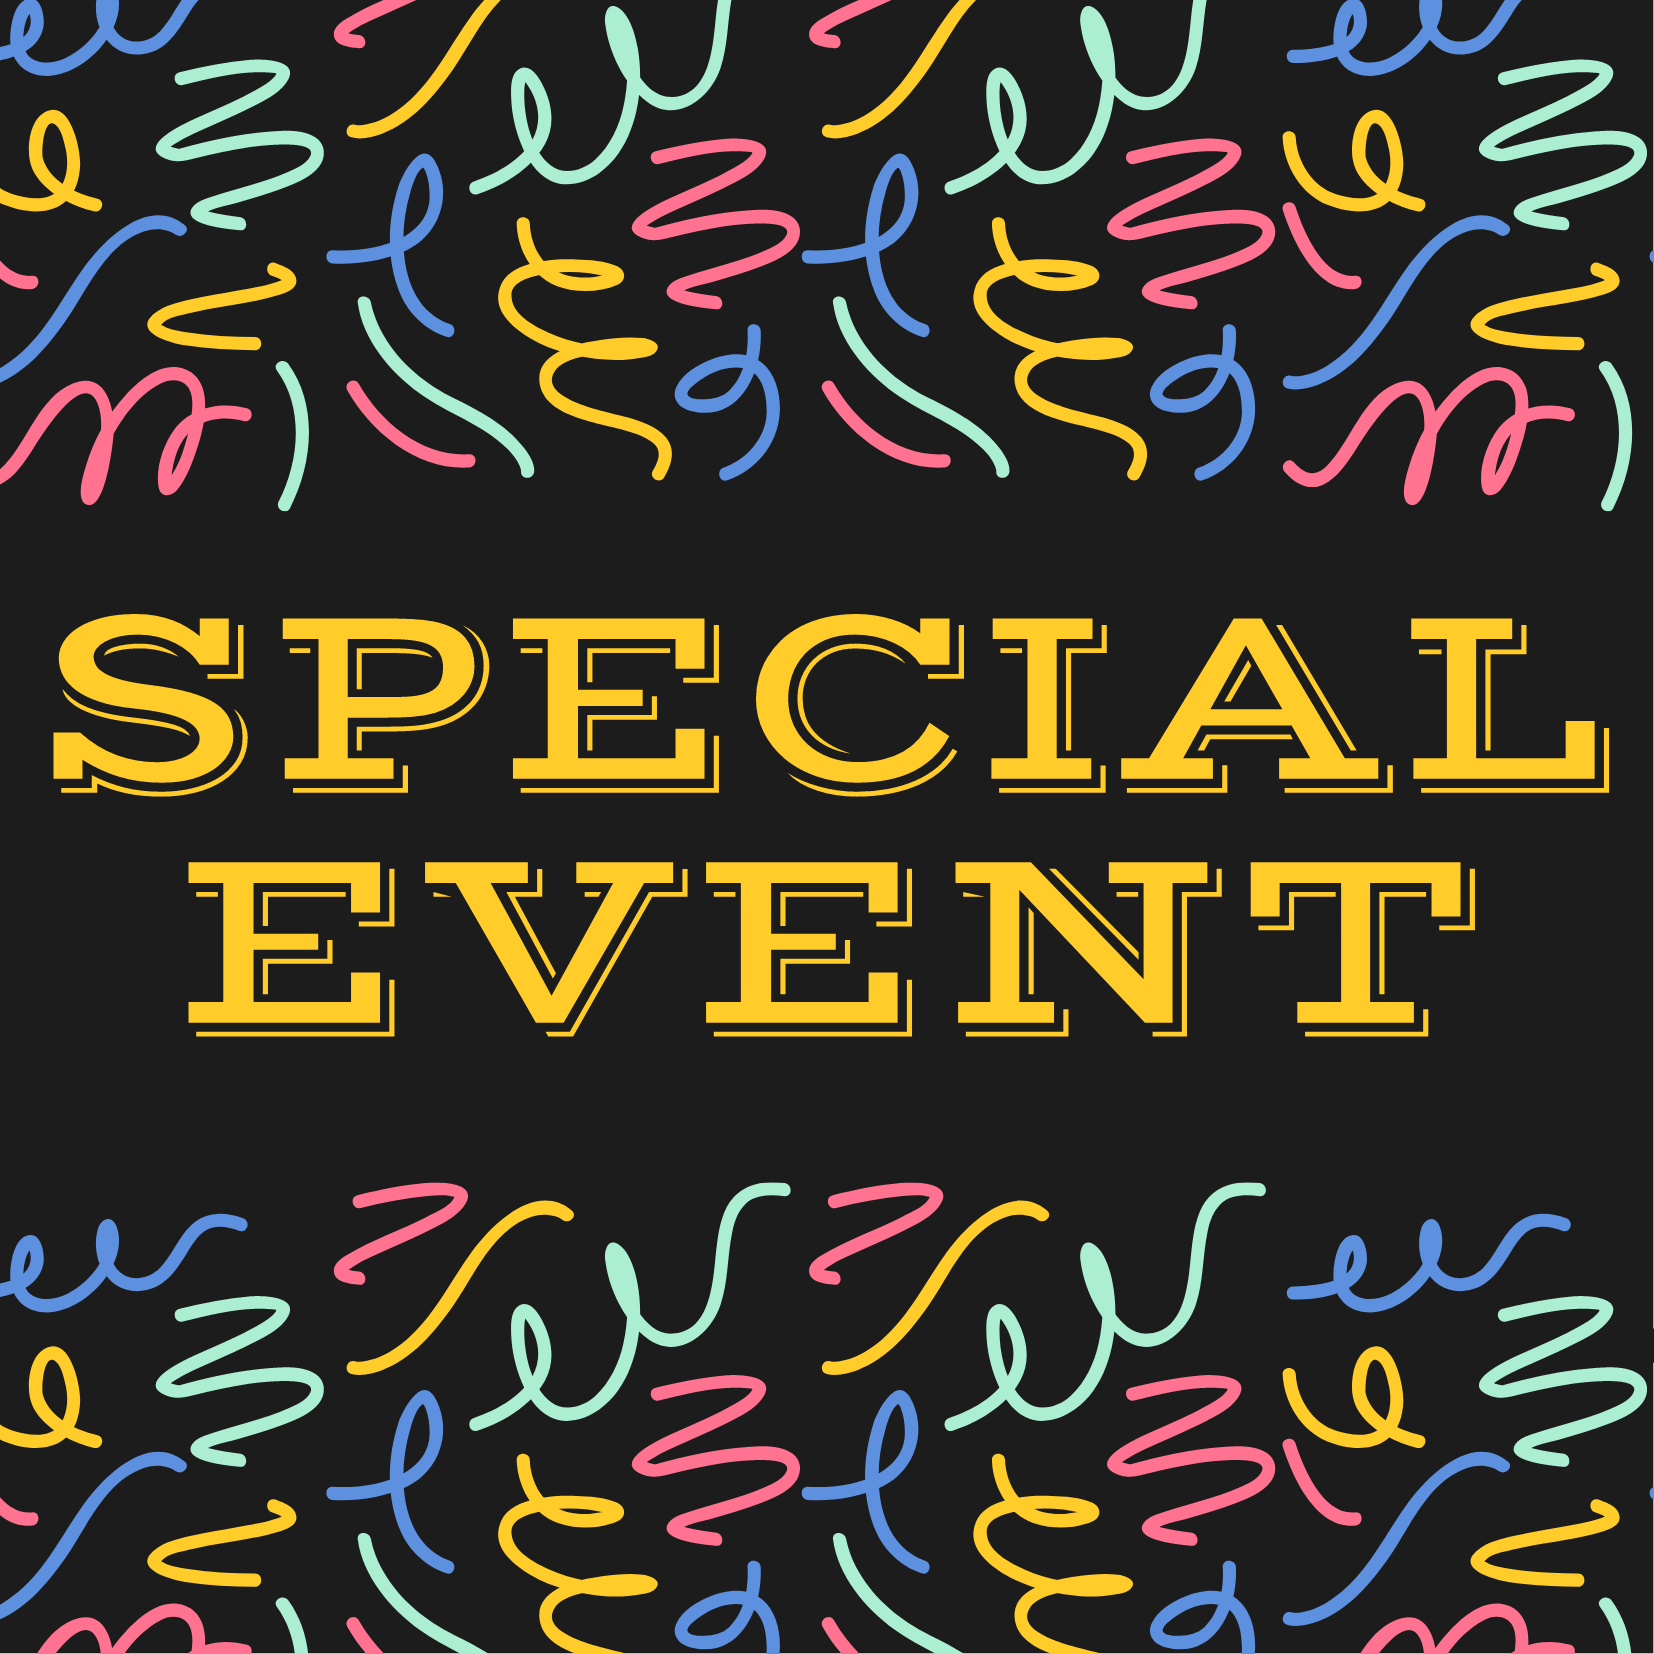 Graphic reading "Special Event" on black background filled with colorful confetti shapes